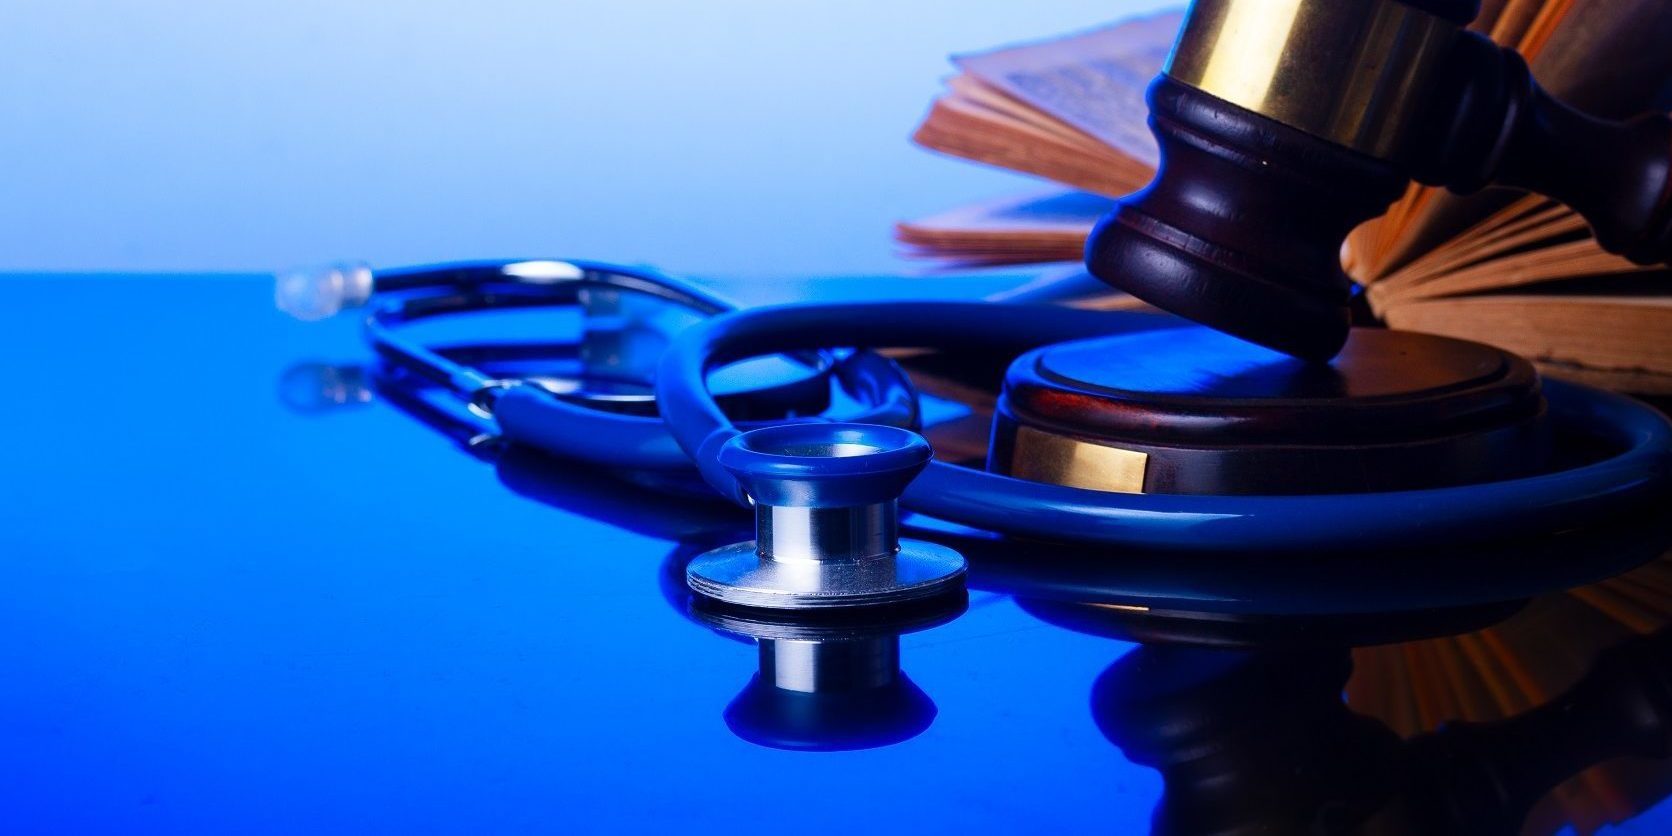 Wooden law gavel with stethoscope and open book - medical law and justice concept